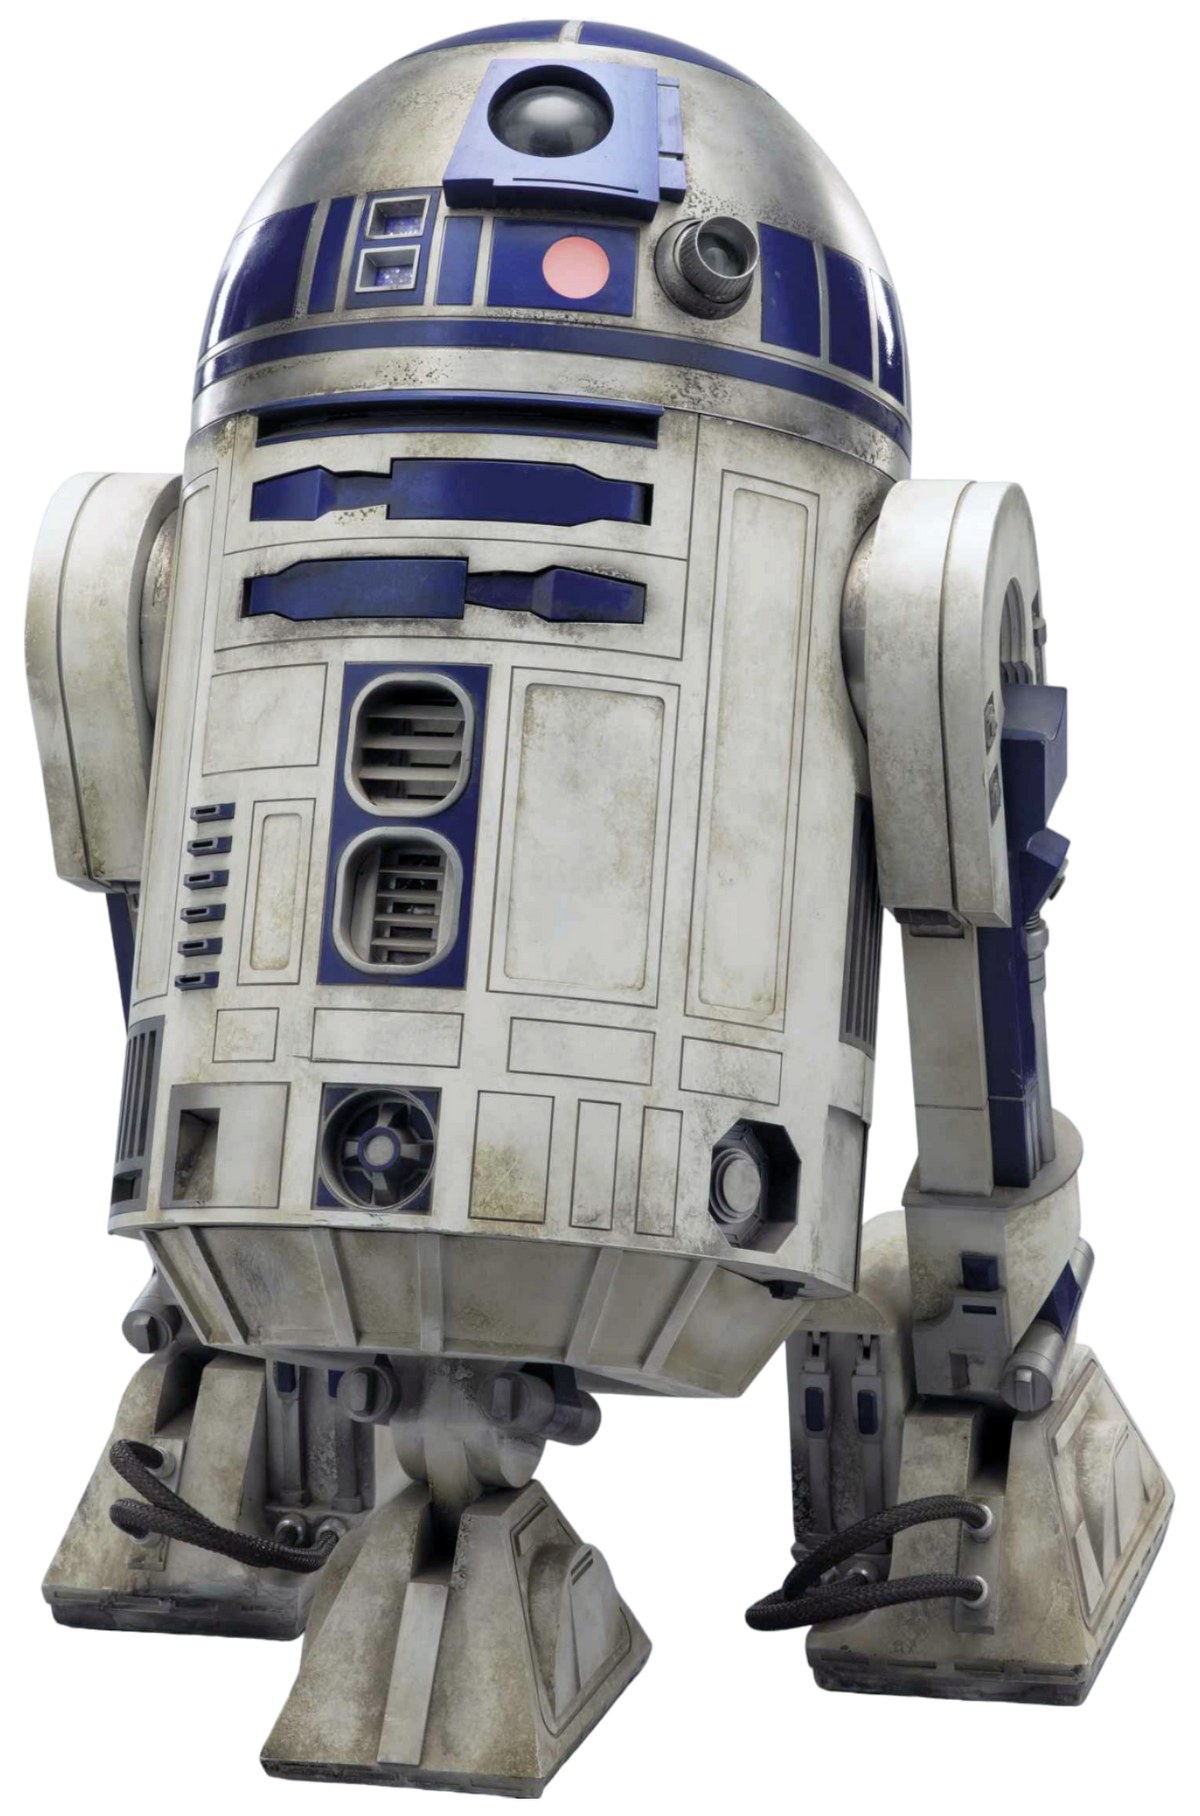 https://static.wikia.nocookie.net/starwars/images/9/95/R2-D2-TROSOCE.png/revision/latest/scale-to-width-down/1200?cb=20240104043013